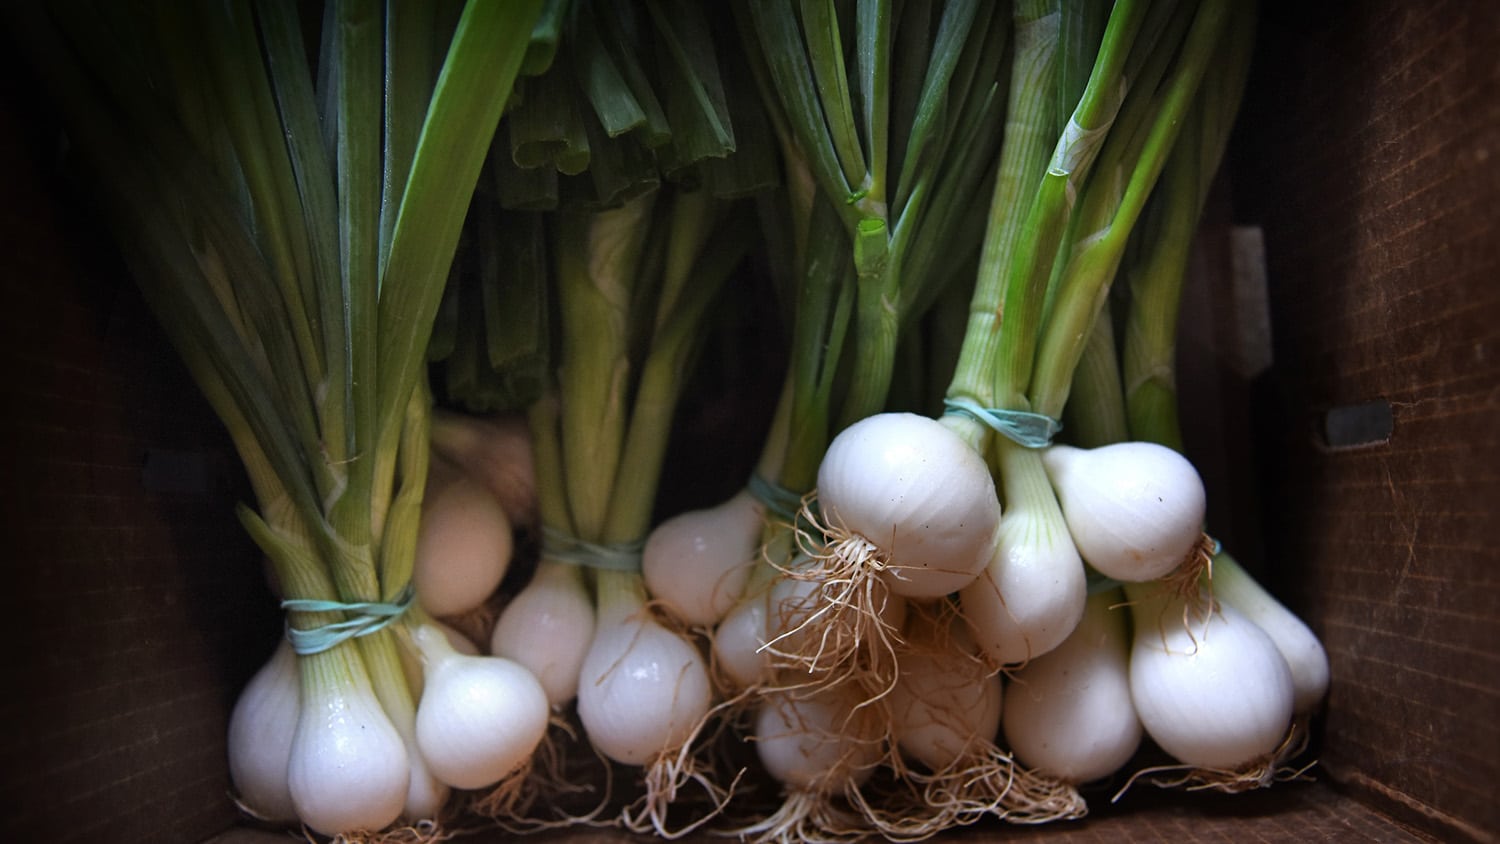 Bunch of spring onions in a box